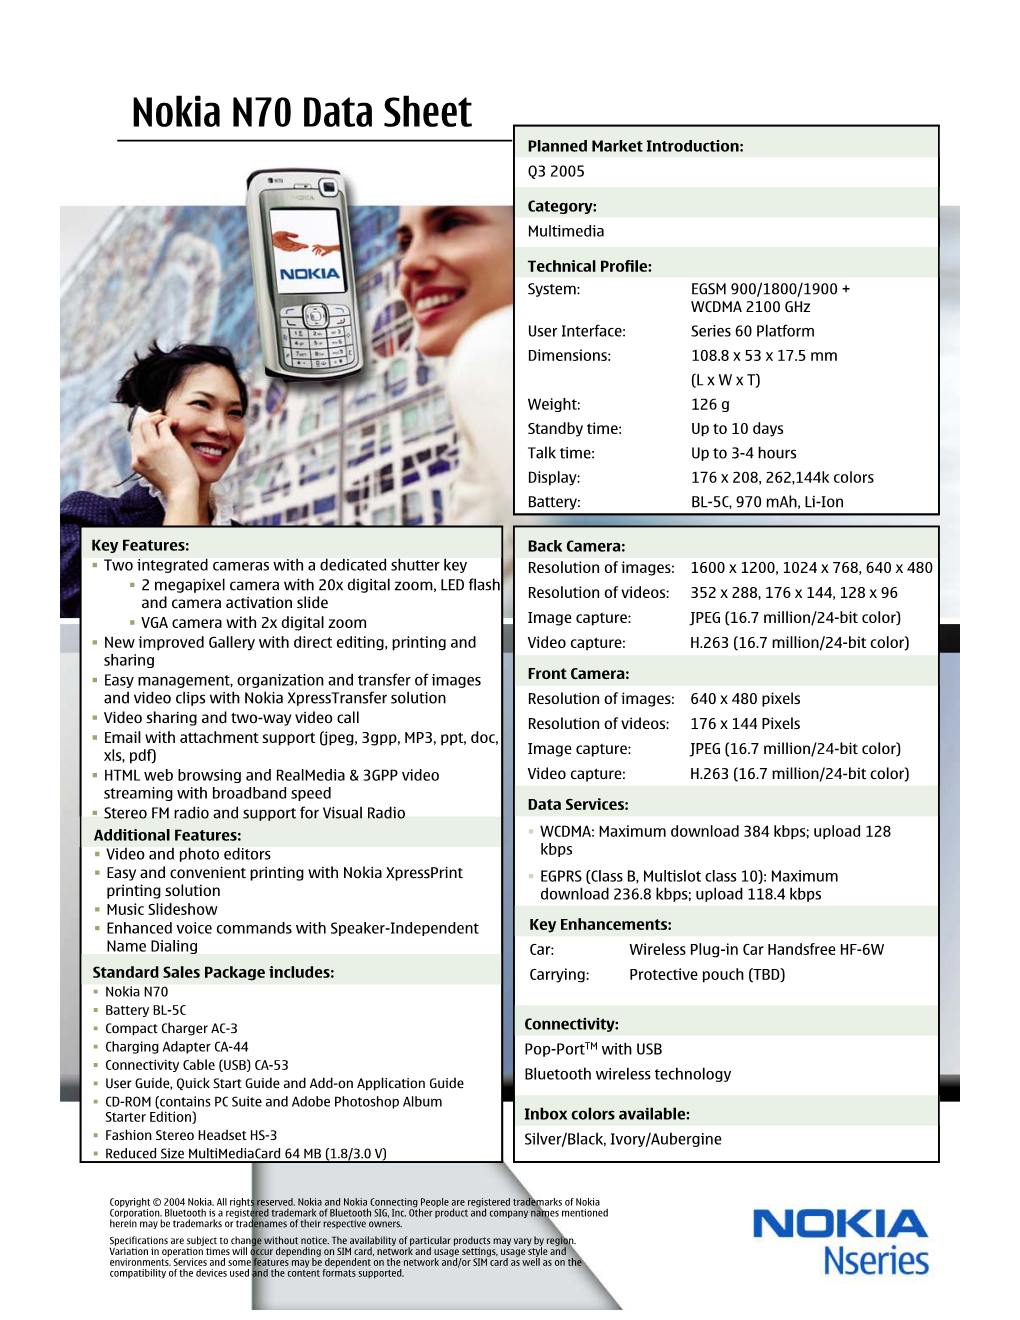 Nokia N70 Data Sheet Planned Market Introduction: Q3 2005